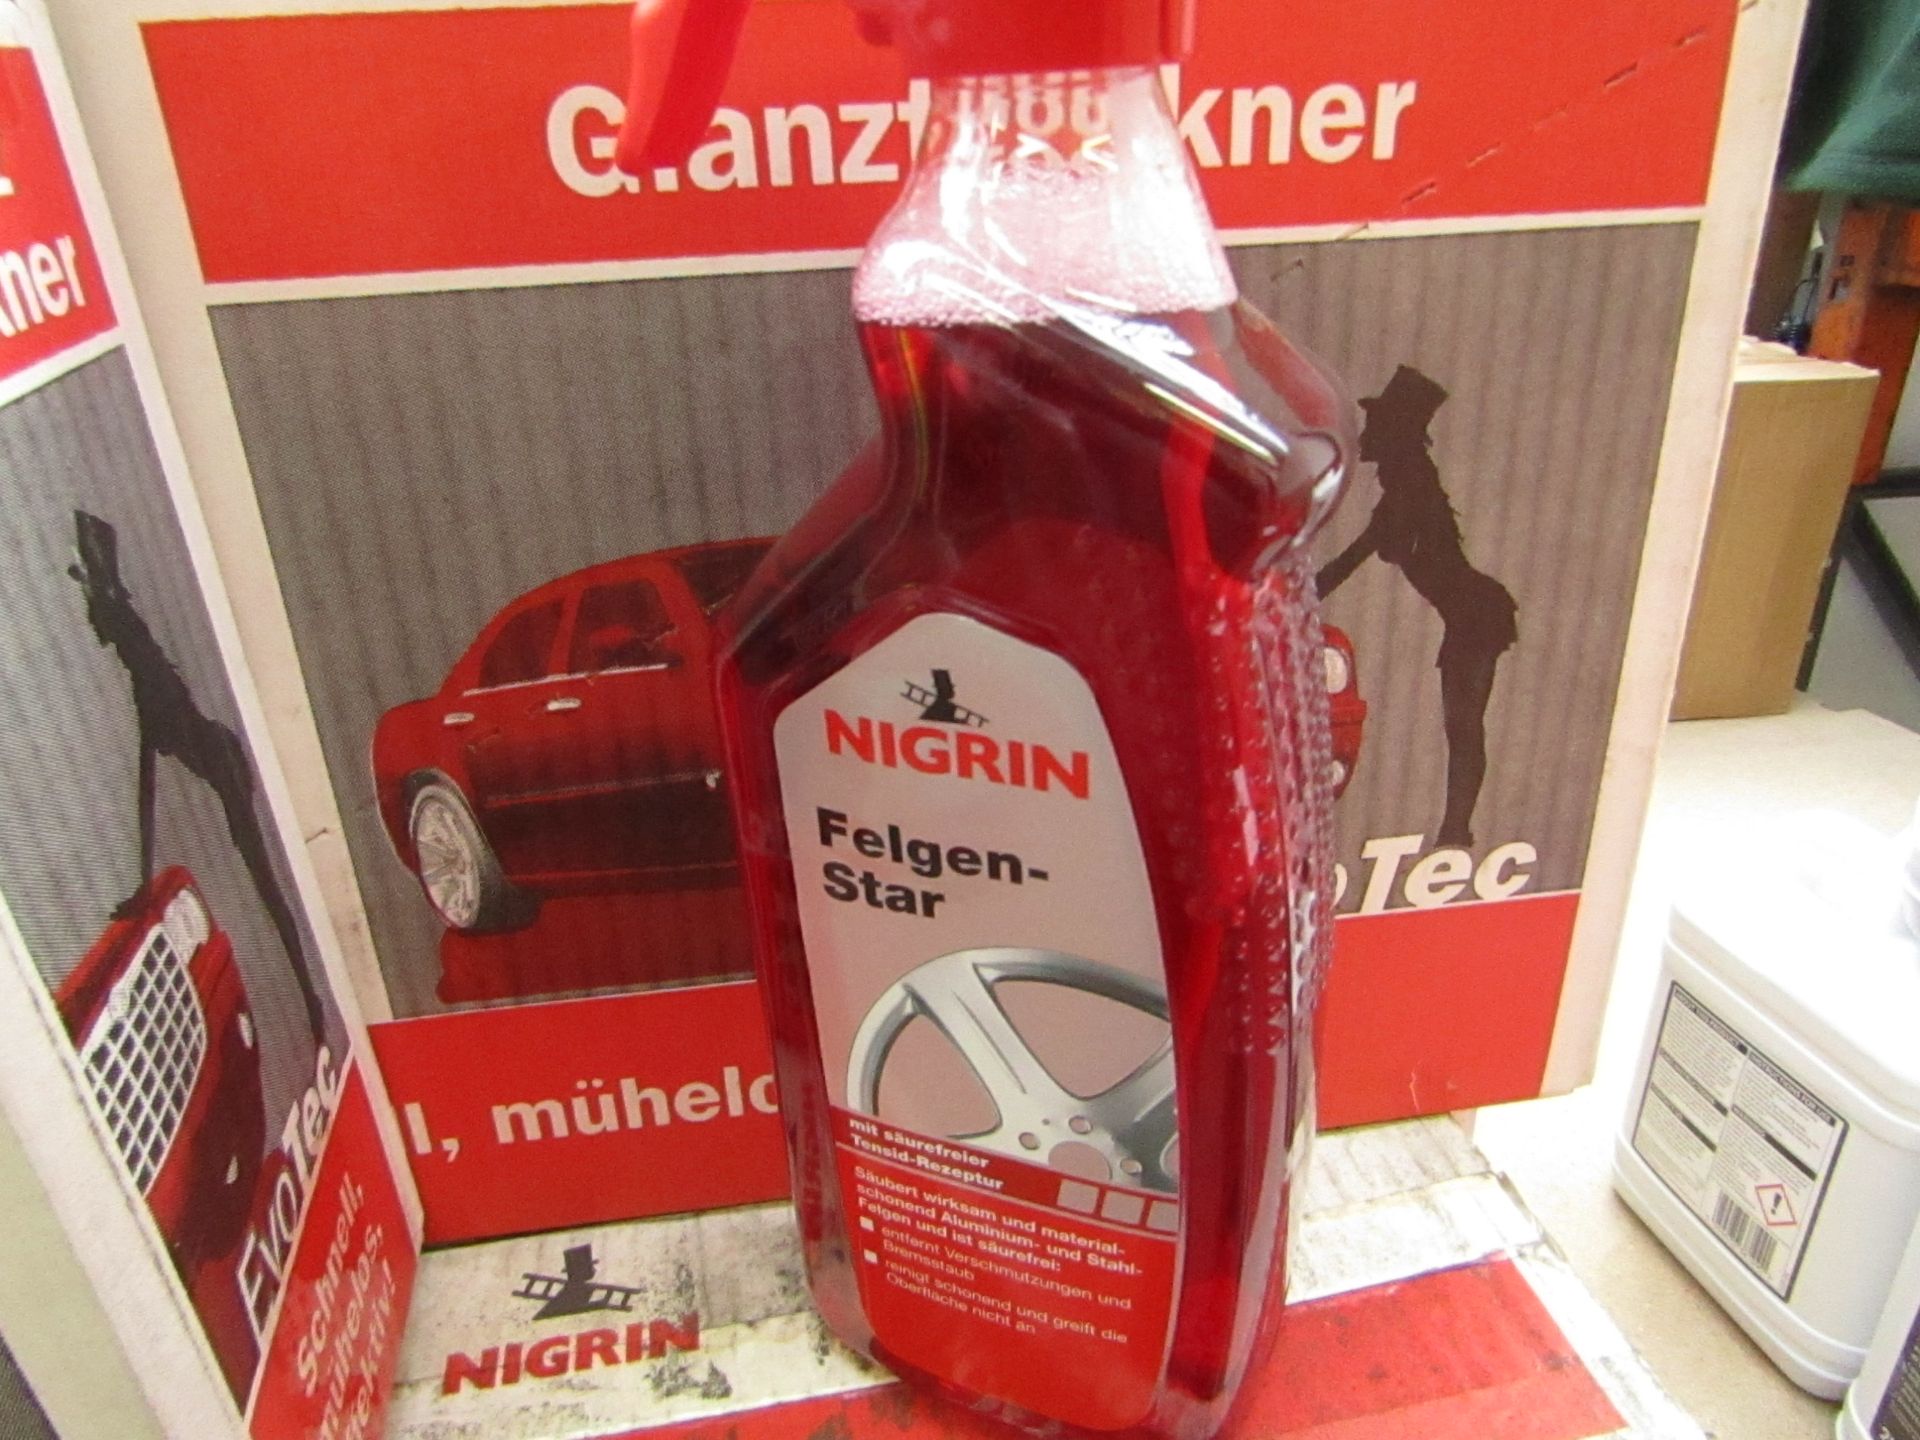 7x 750ml spray bottles of Nigrin Feldon star cleaning liquid, looks to be for Alloy wheels from